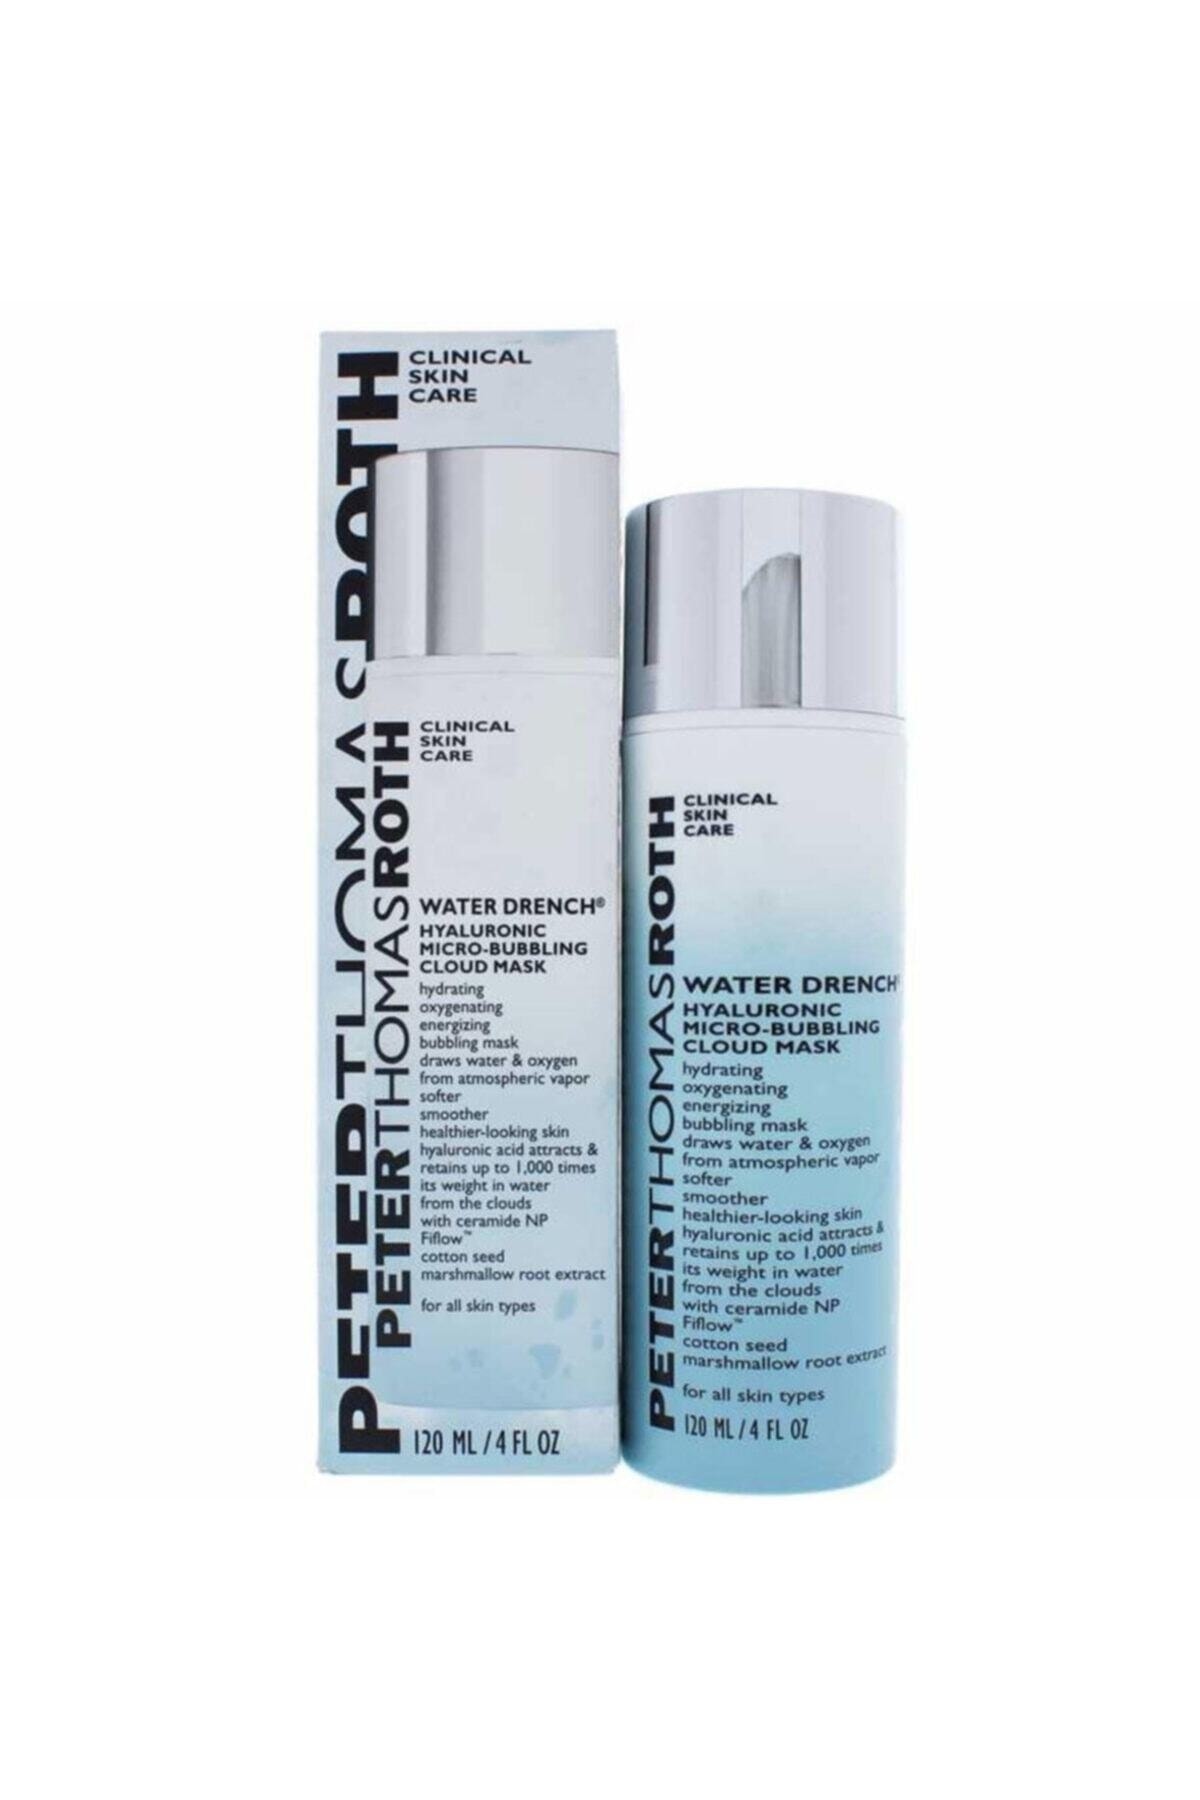 PETER THOMAS ROTH Water Drench Hyaluronic Micro-bubbling Cloud Mask 120 Ml